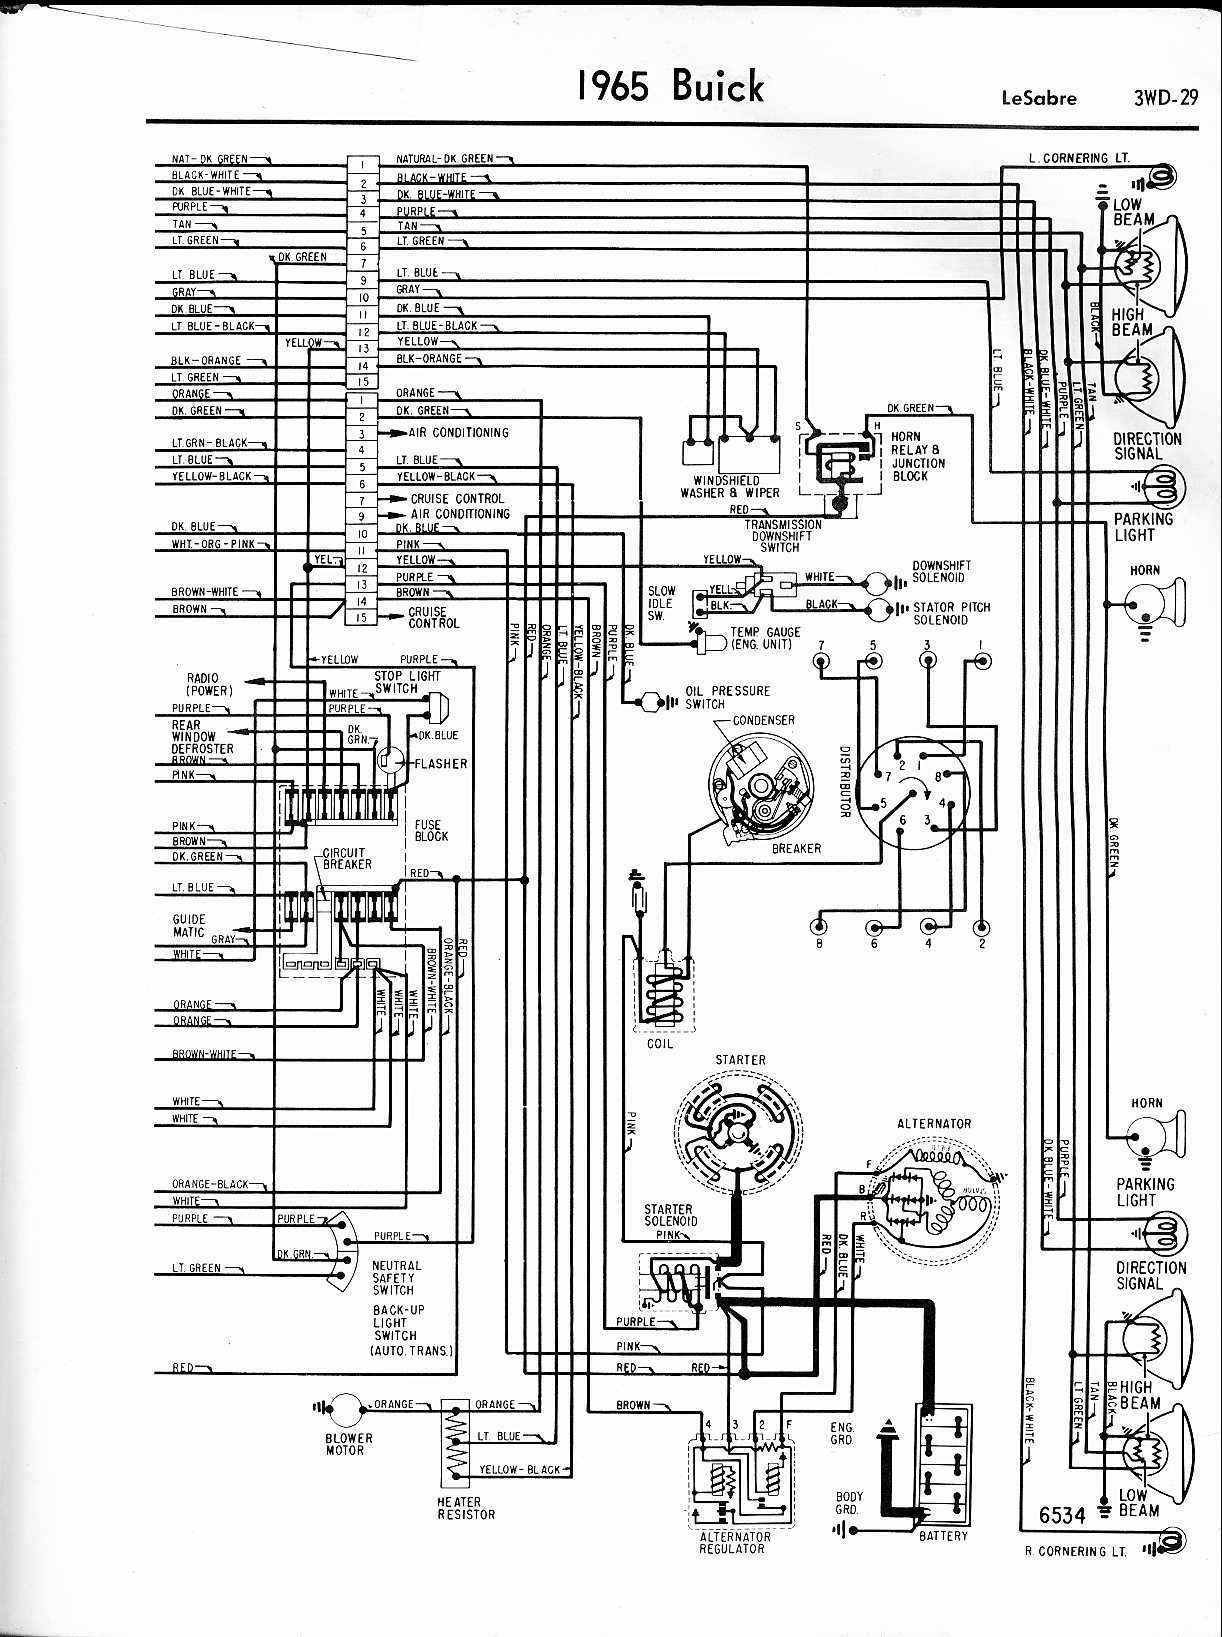 2005 Buick Lacrosse Wiring Diagram from www.oldcarmanualproject.com